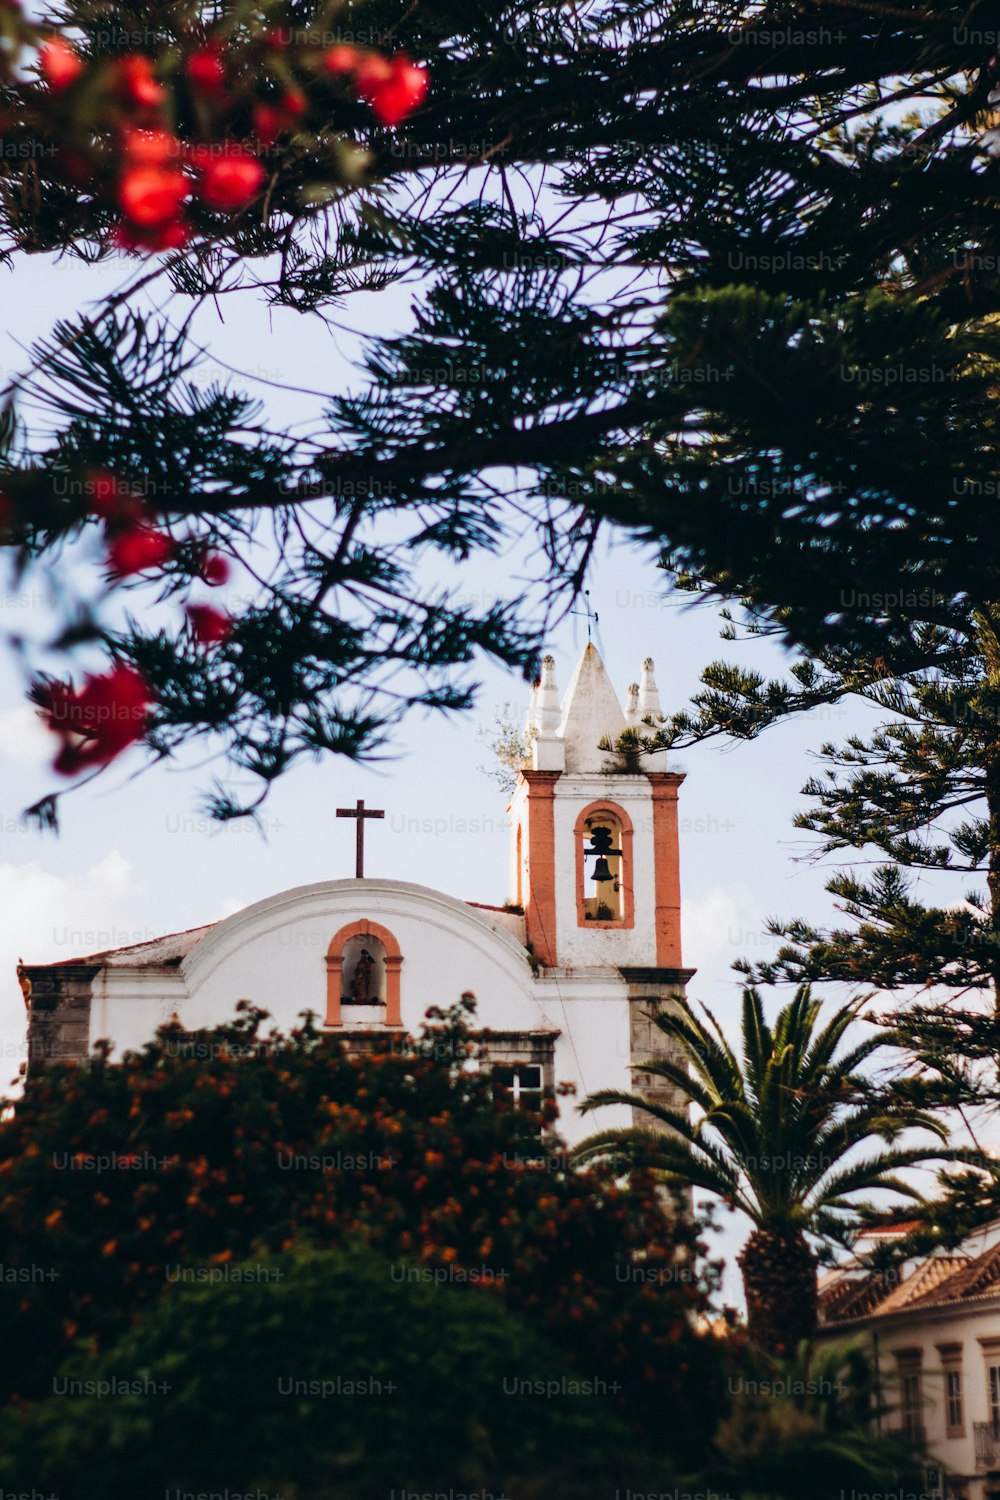 a church with a bell tower surrounded by trees